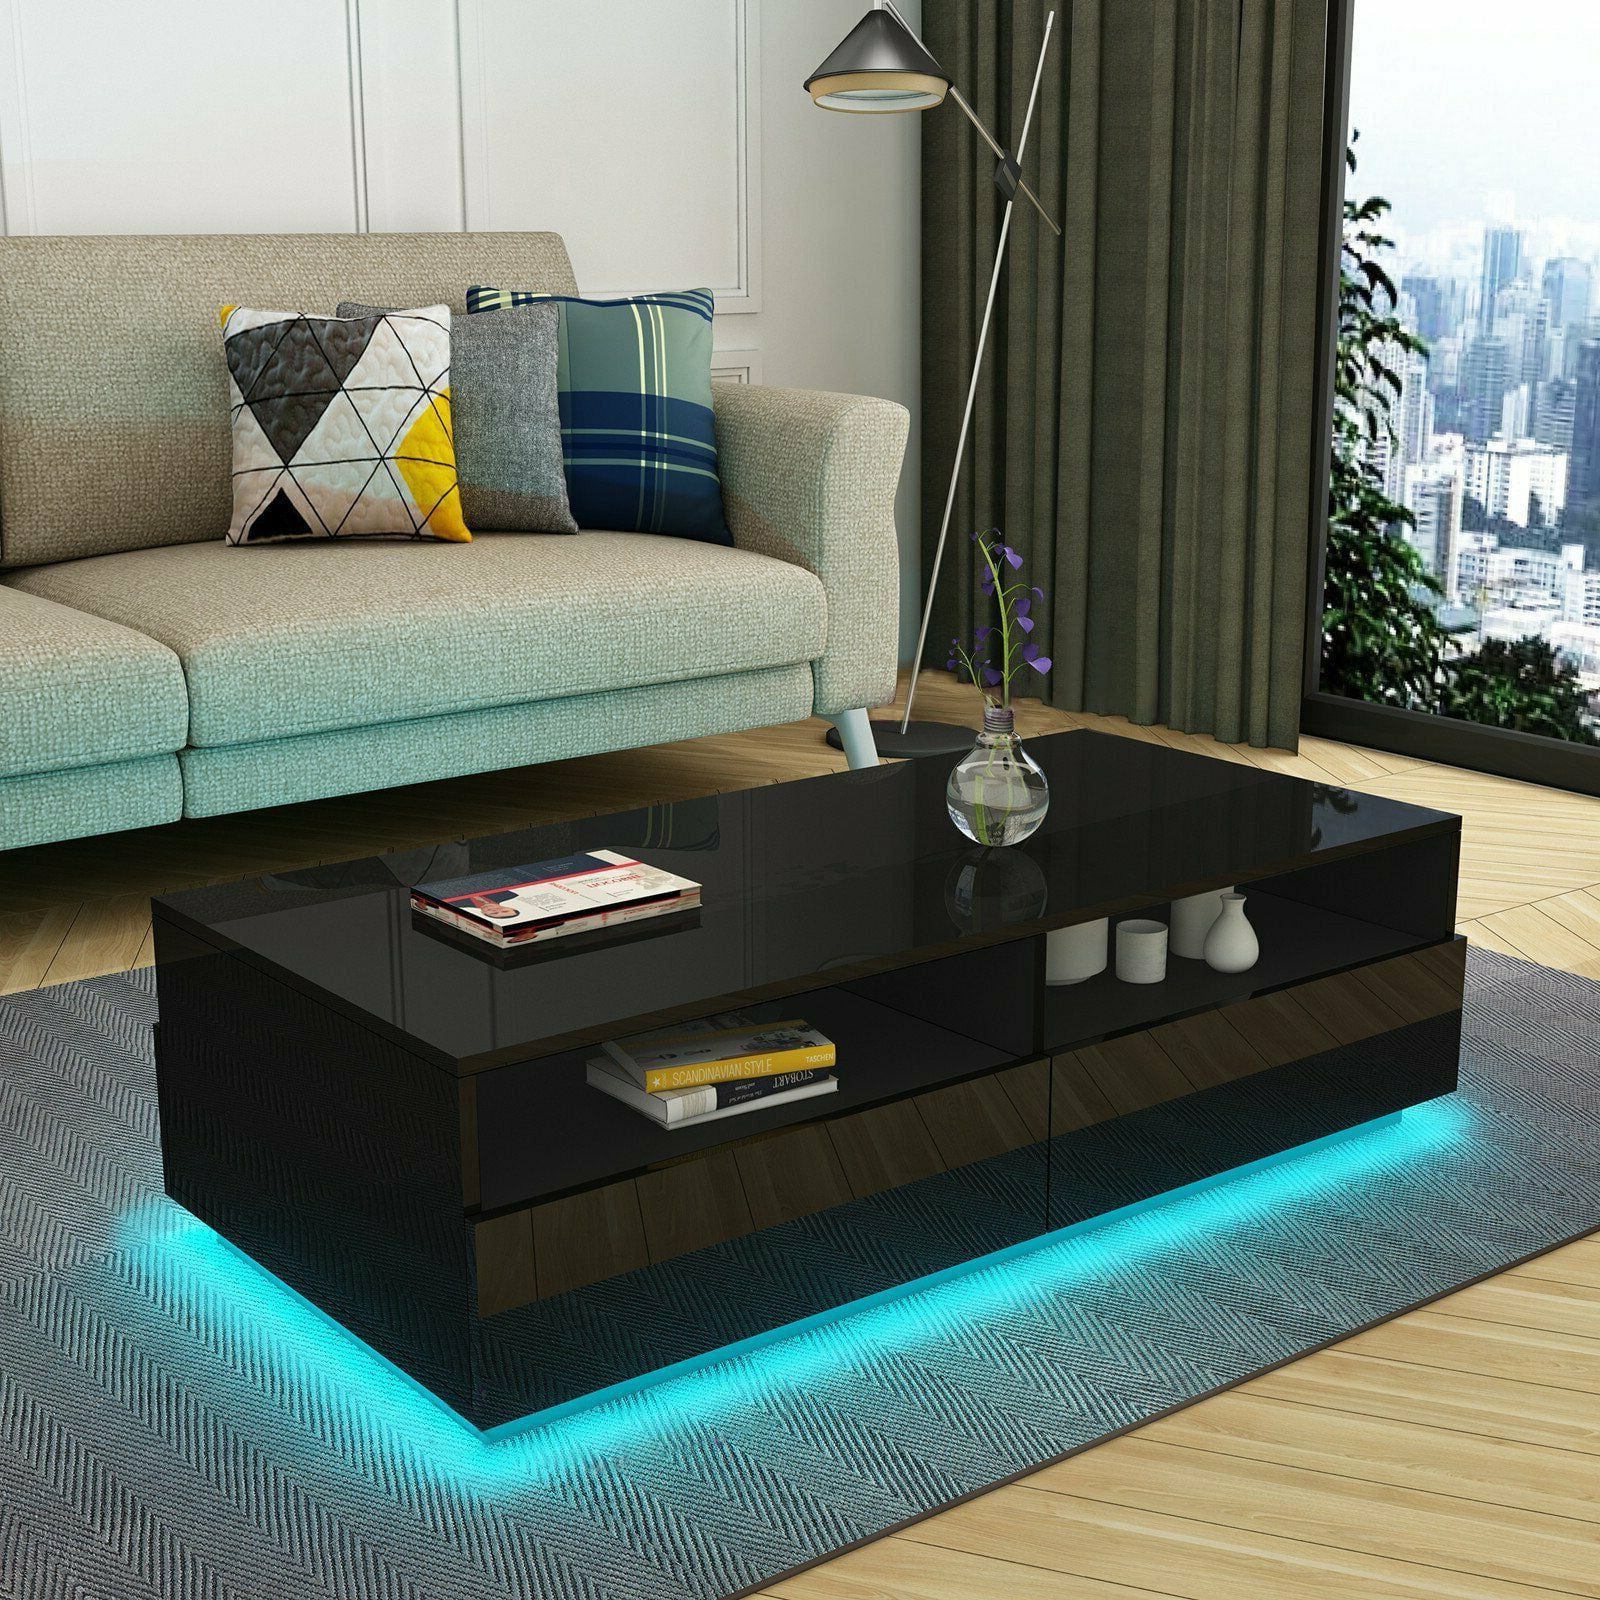 Led Rectangular Coffee Table Tea Modern Living Room Furniture Black Intended For Coffee Tables With Led Lights (Gallery 14 of 20)